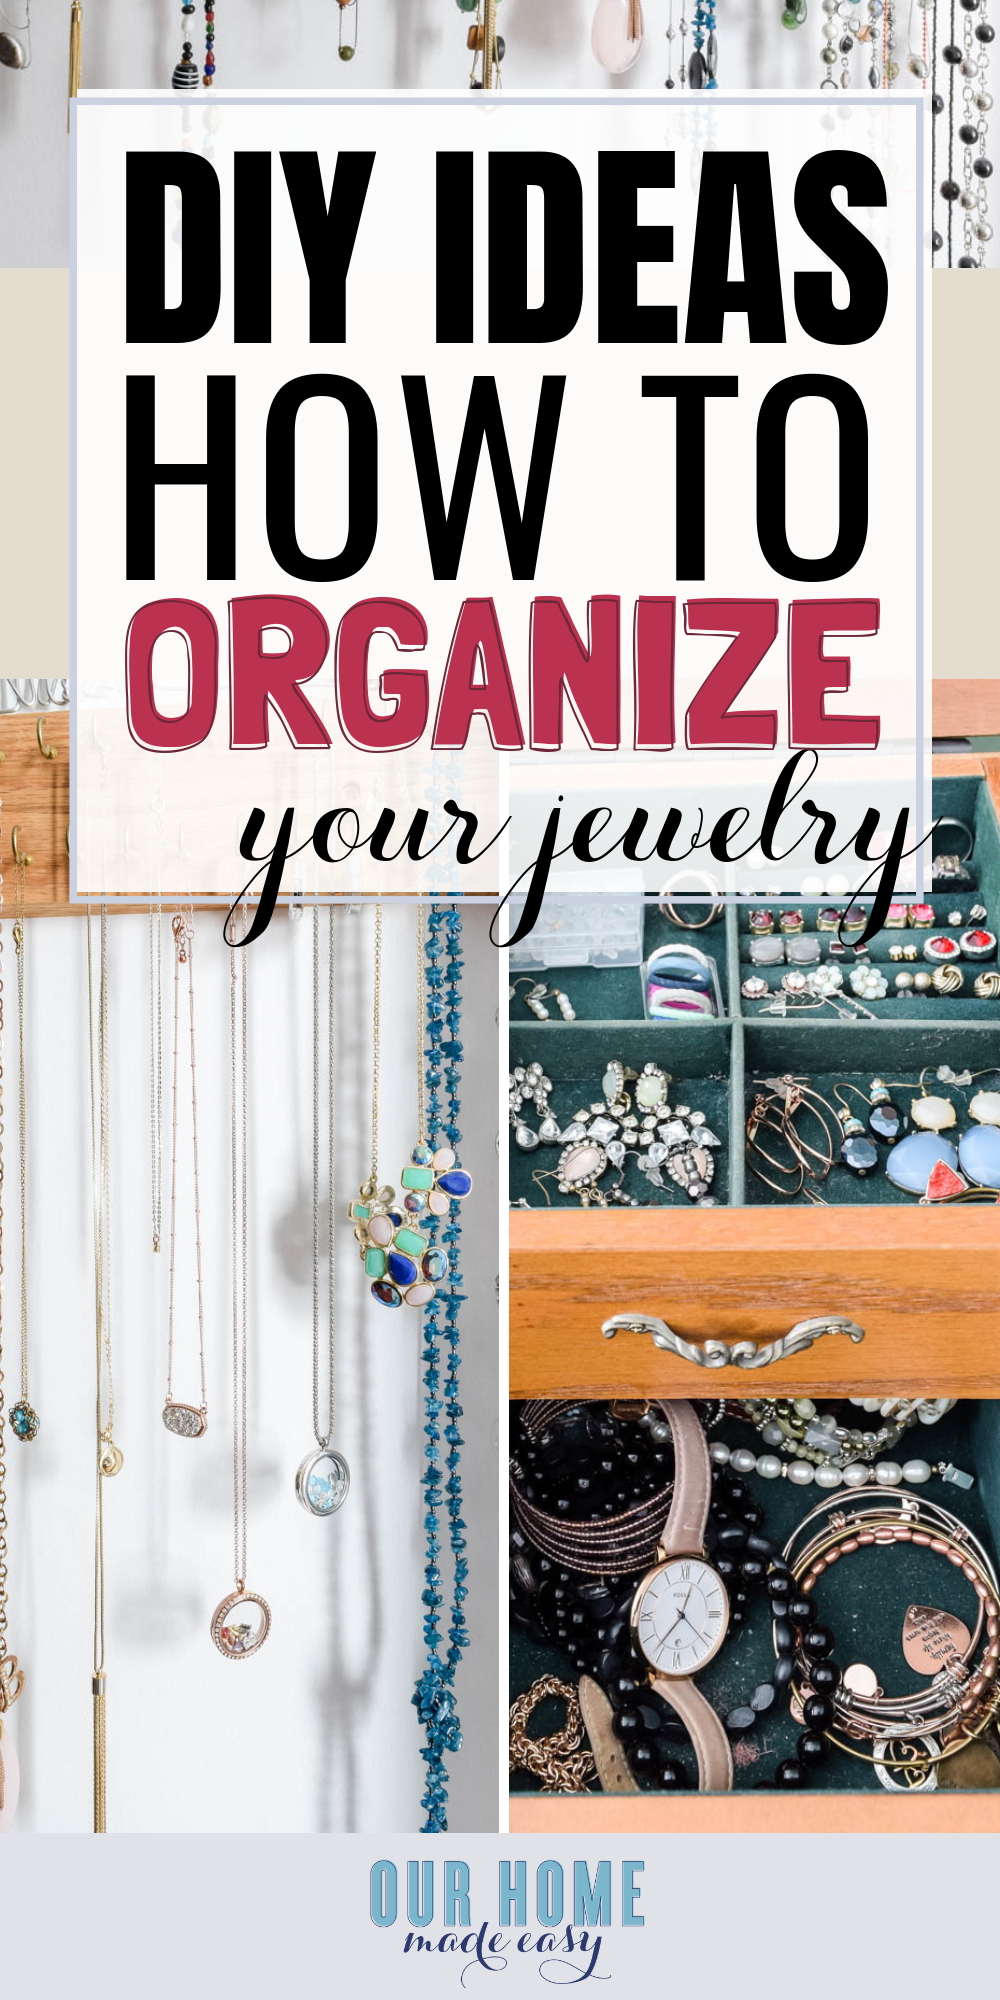 DIY Ideas on How to Organize Your Jewelry for good! Declutter and organize your jewelry so that you can quickly find what you need in the mornings! #organization #homedecor #organize #ourhomemadeeasy